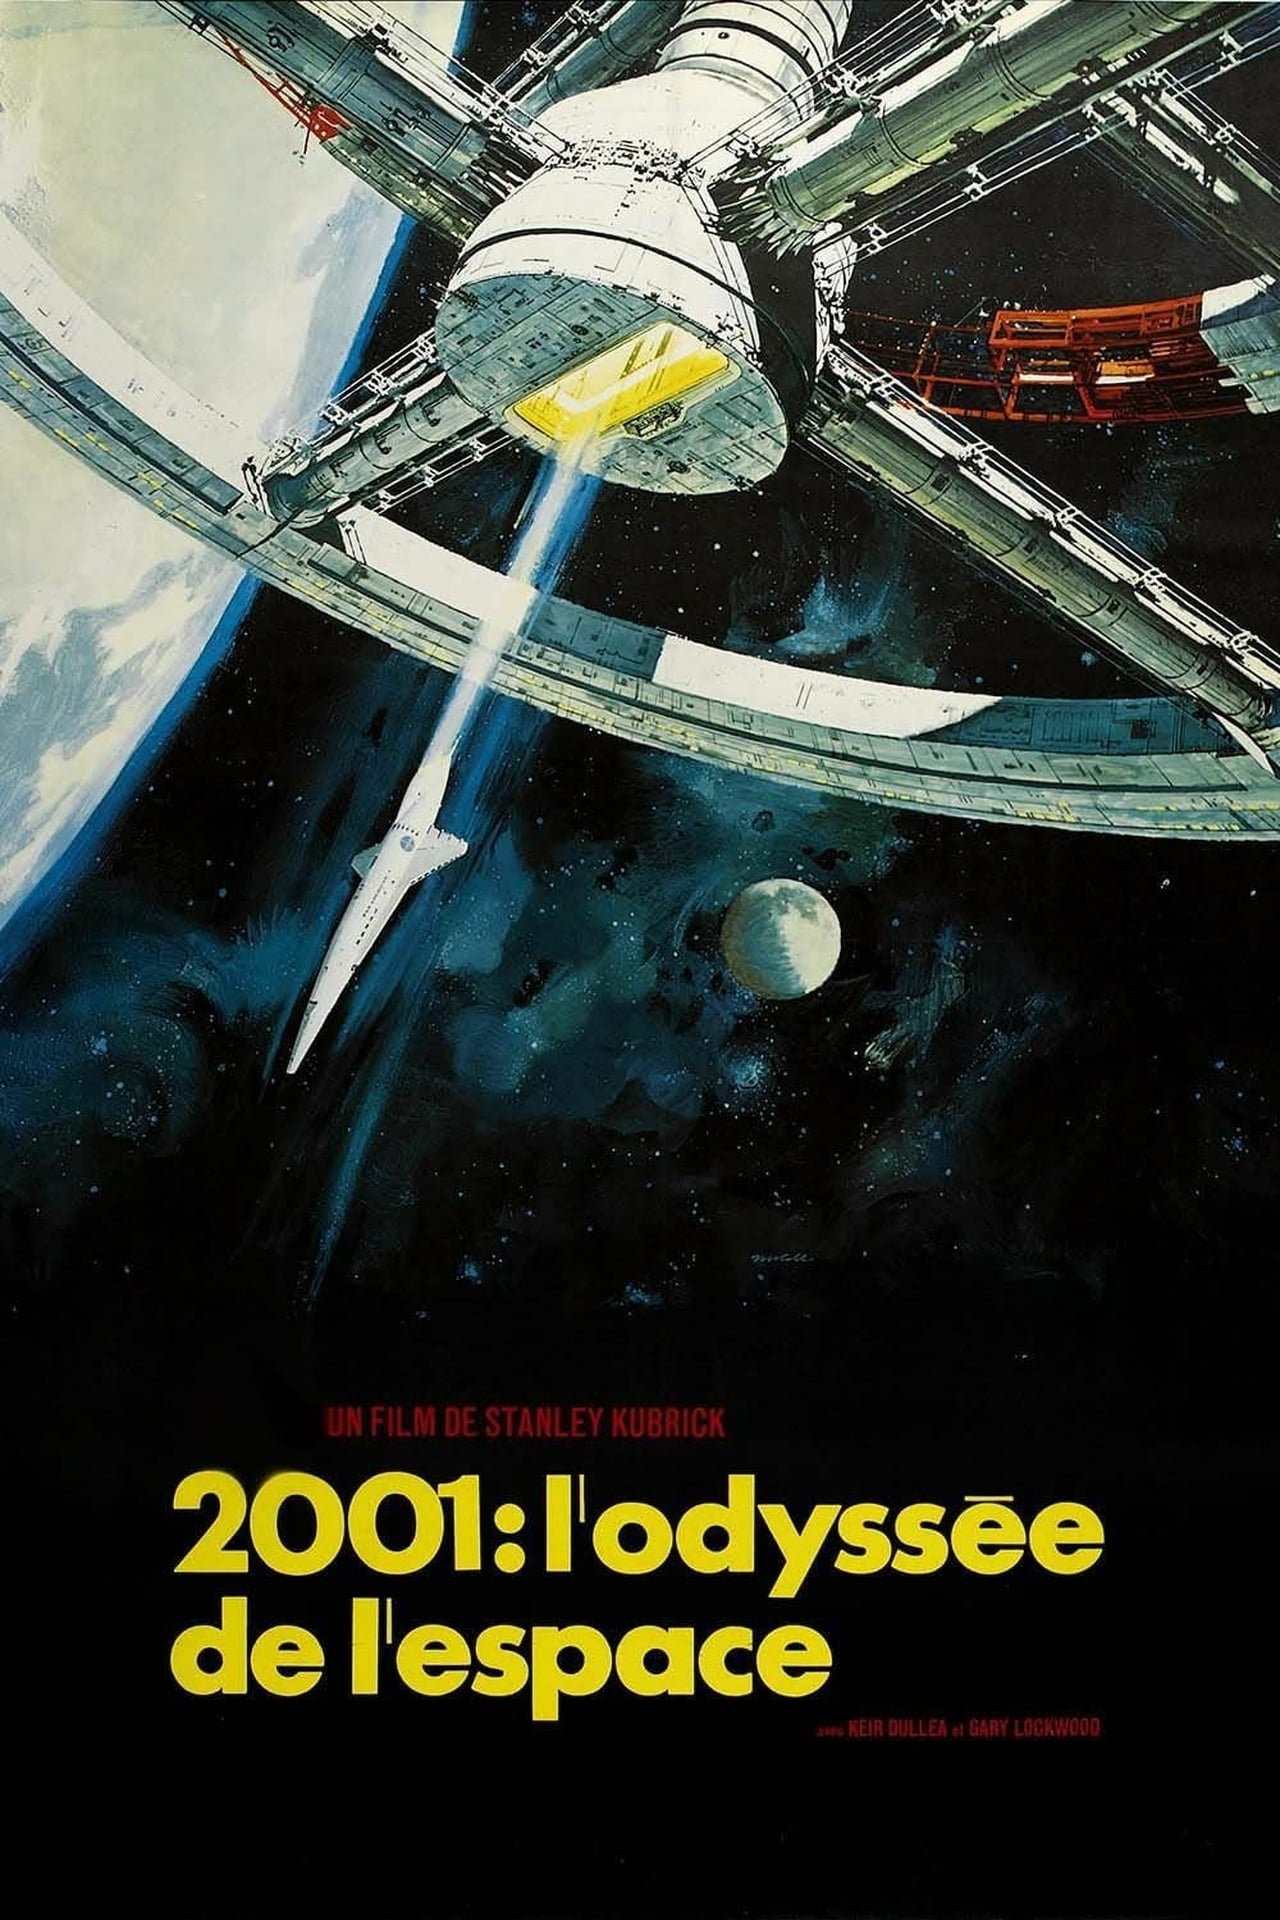 space odyssey tamil download isaidubs